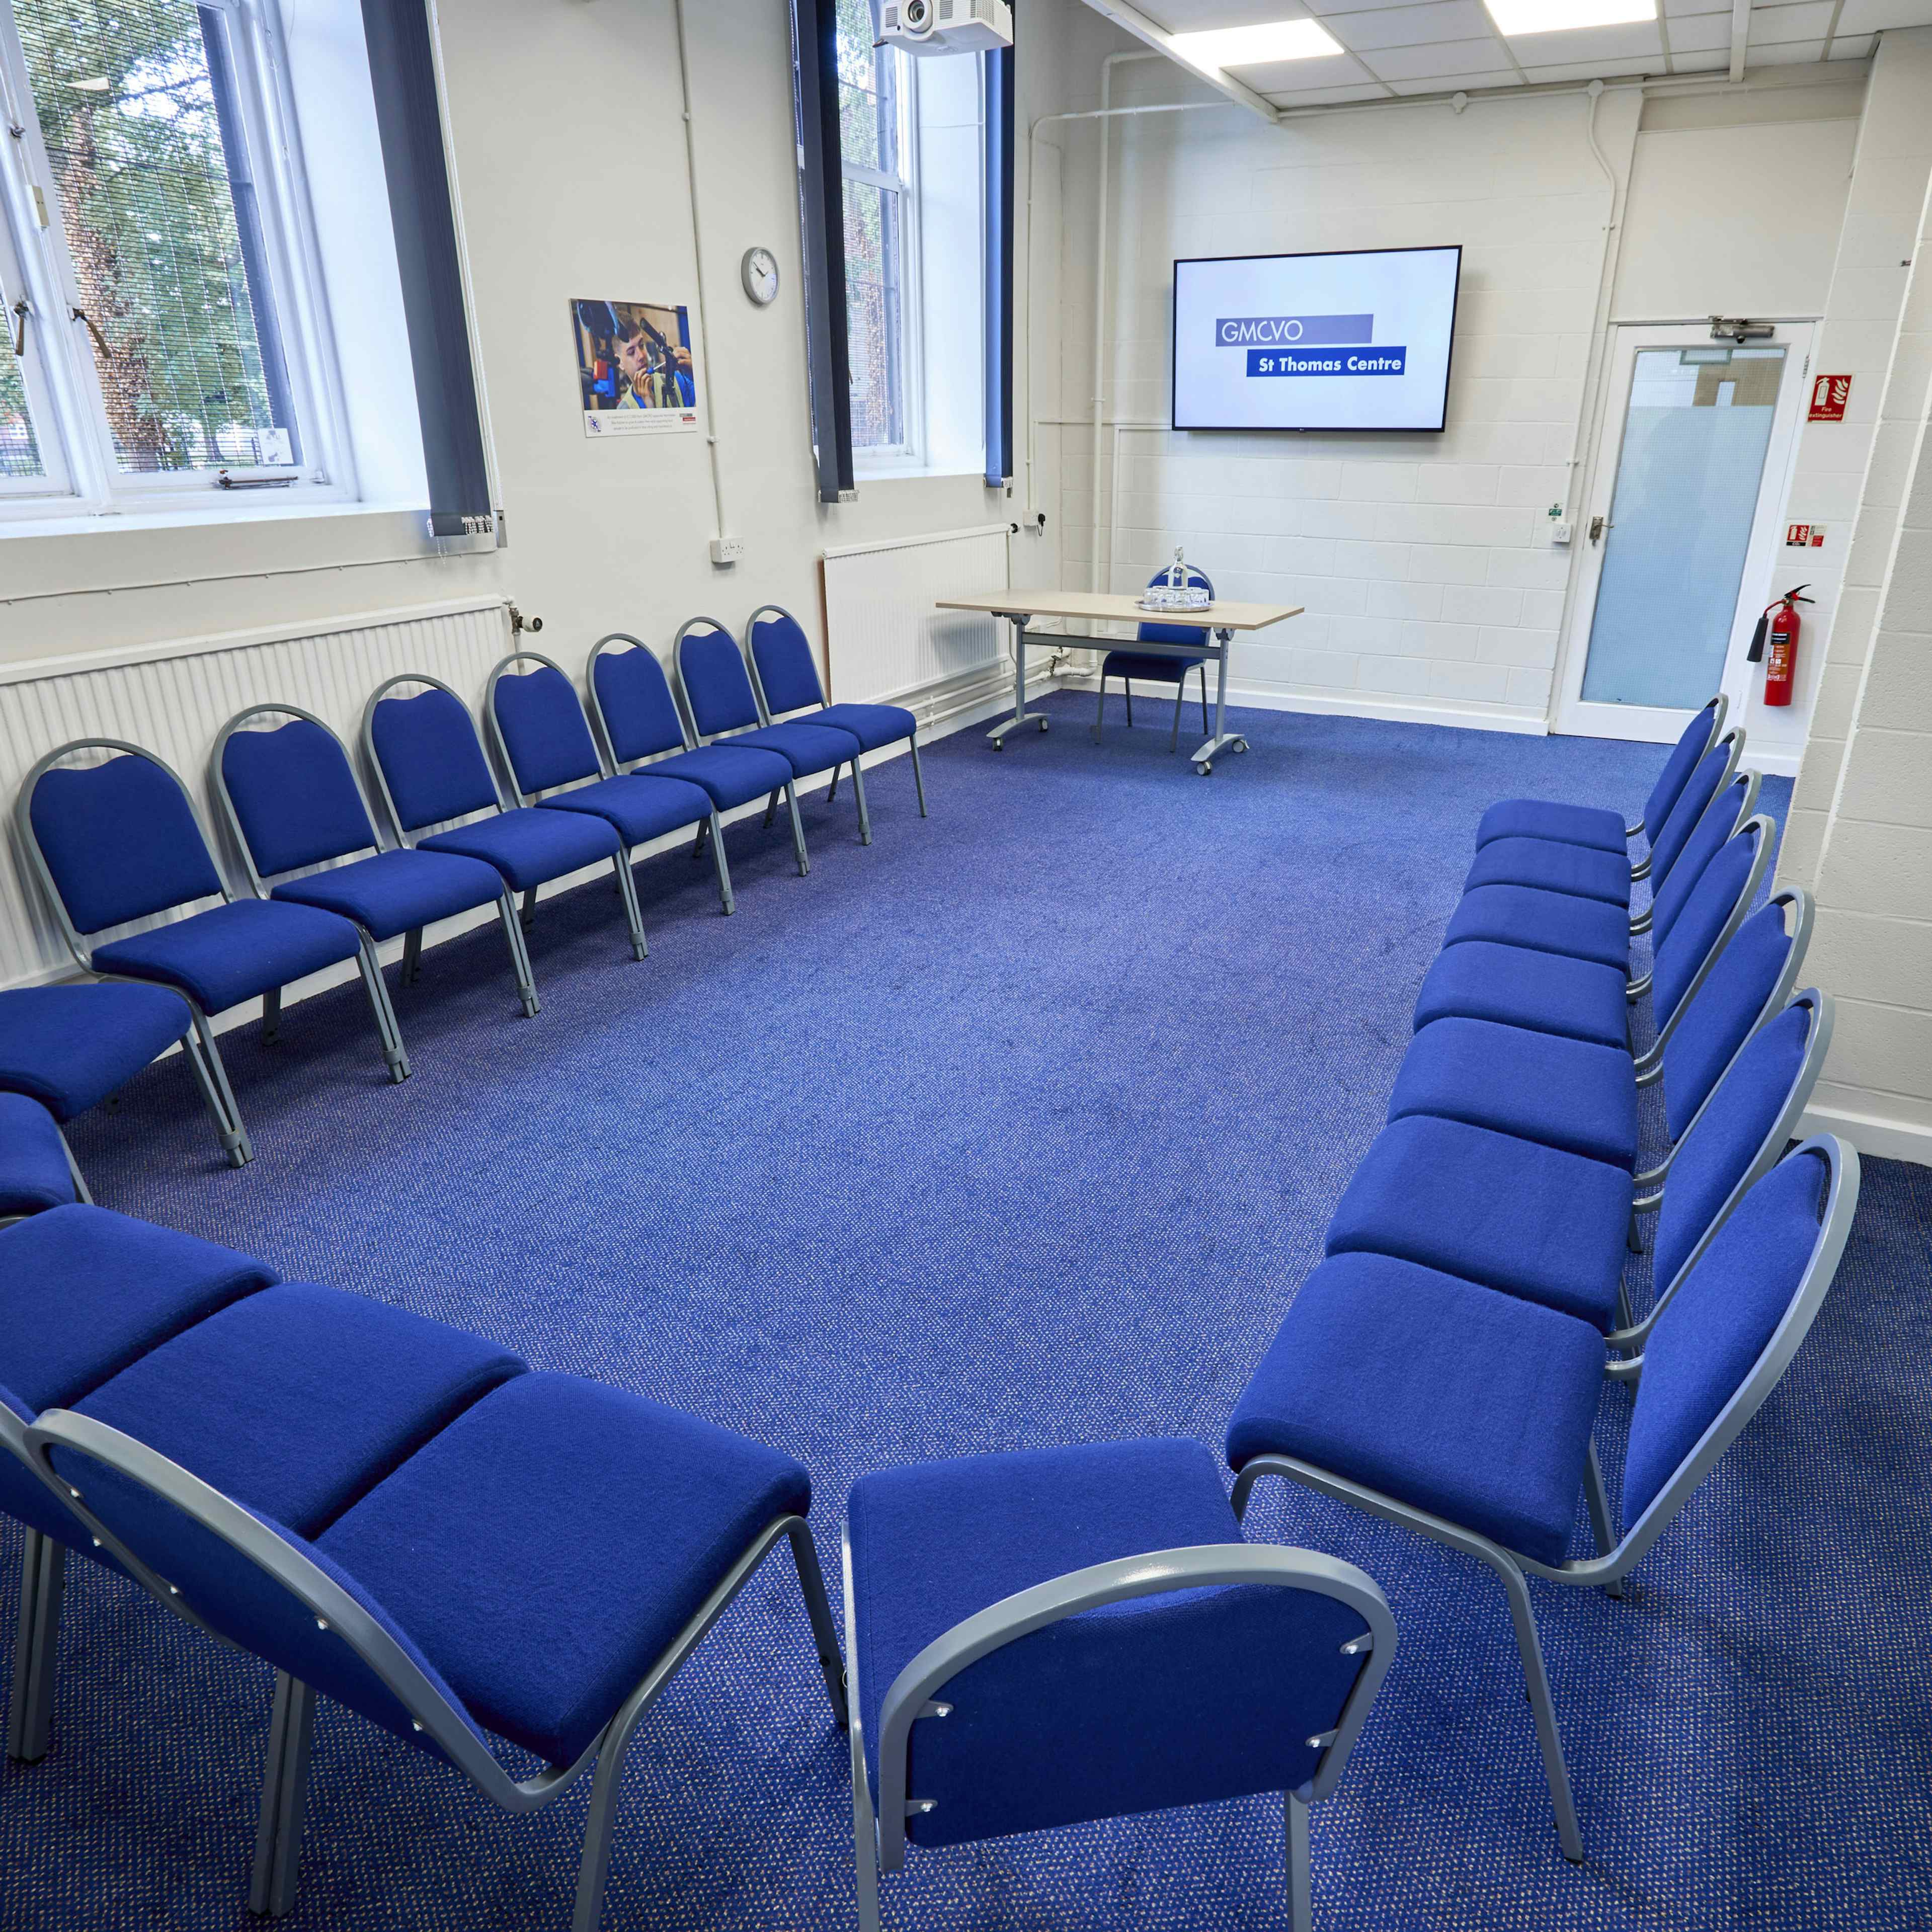 St Thomas Centre - Gaskell Room image 2